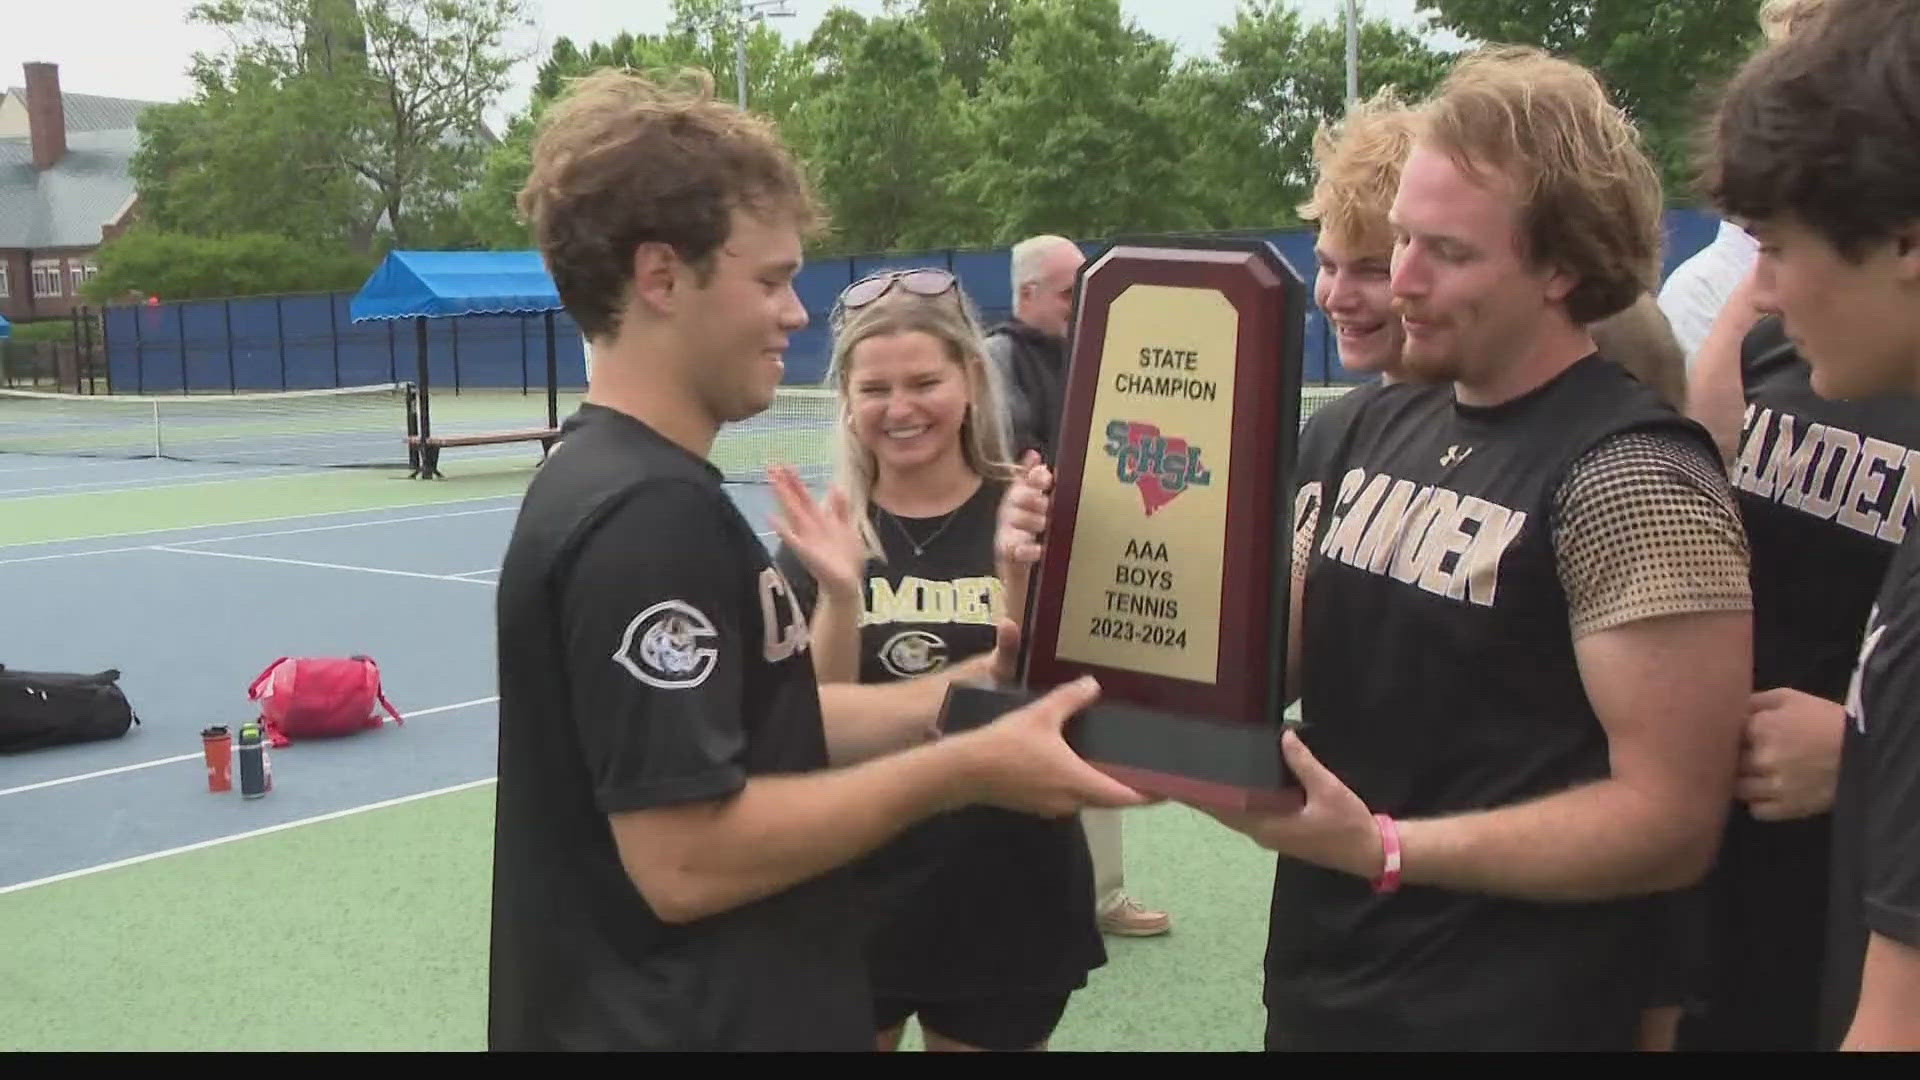 Highlights from the 3A state tennis championship match between Camden and Daniel. The match started in Florence but was completed in Columbia.